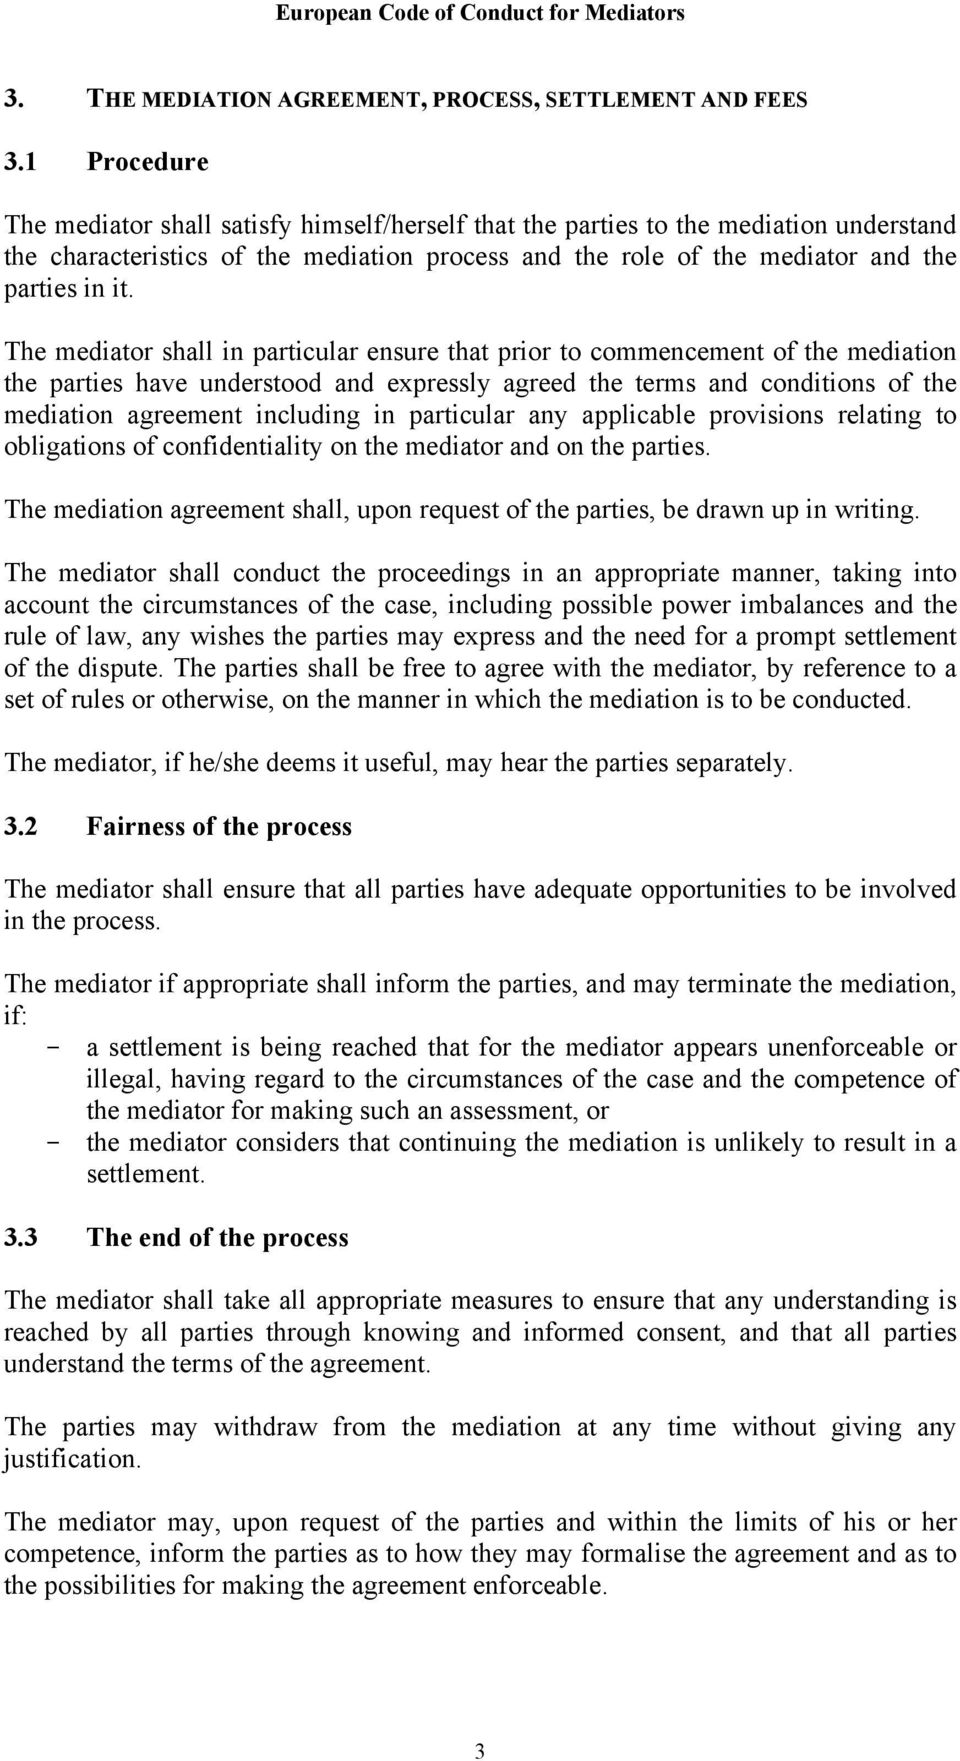 The mediator shall in particular ensure that prior to commencement of the mediation the parties have understood and expressly agreed the terms and conditions of the mediation agreement including in